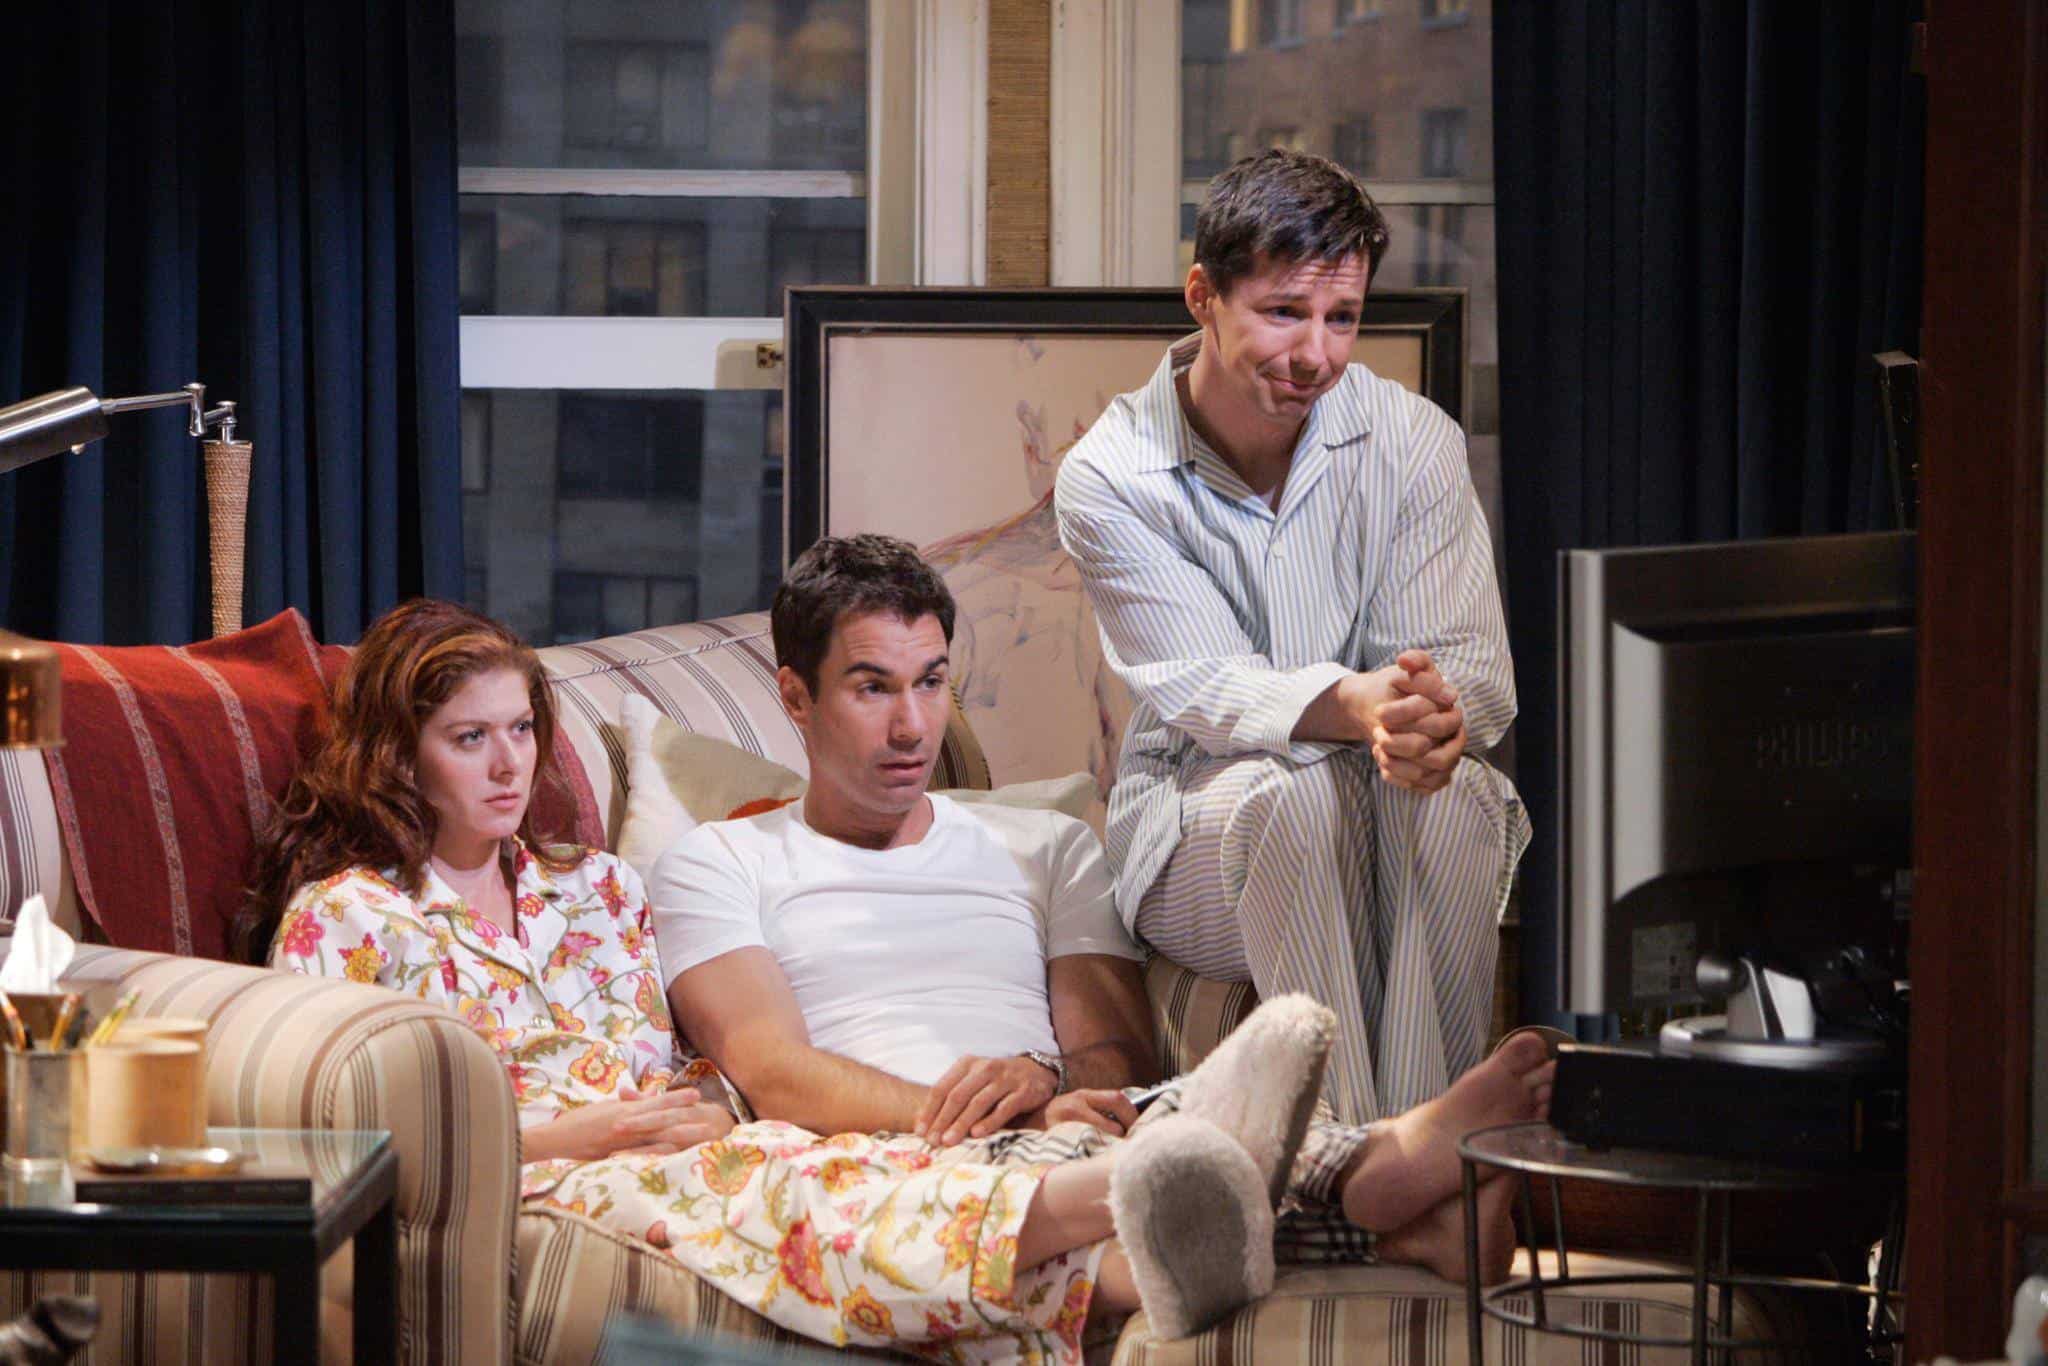 A trio of adult friends are sitting on a couch together in pajamas watching TV in this photo by NBC Studios